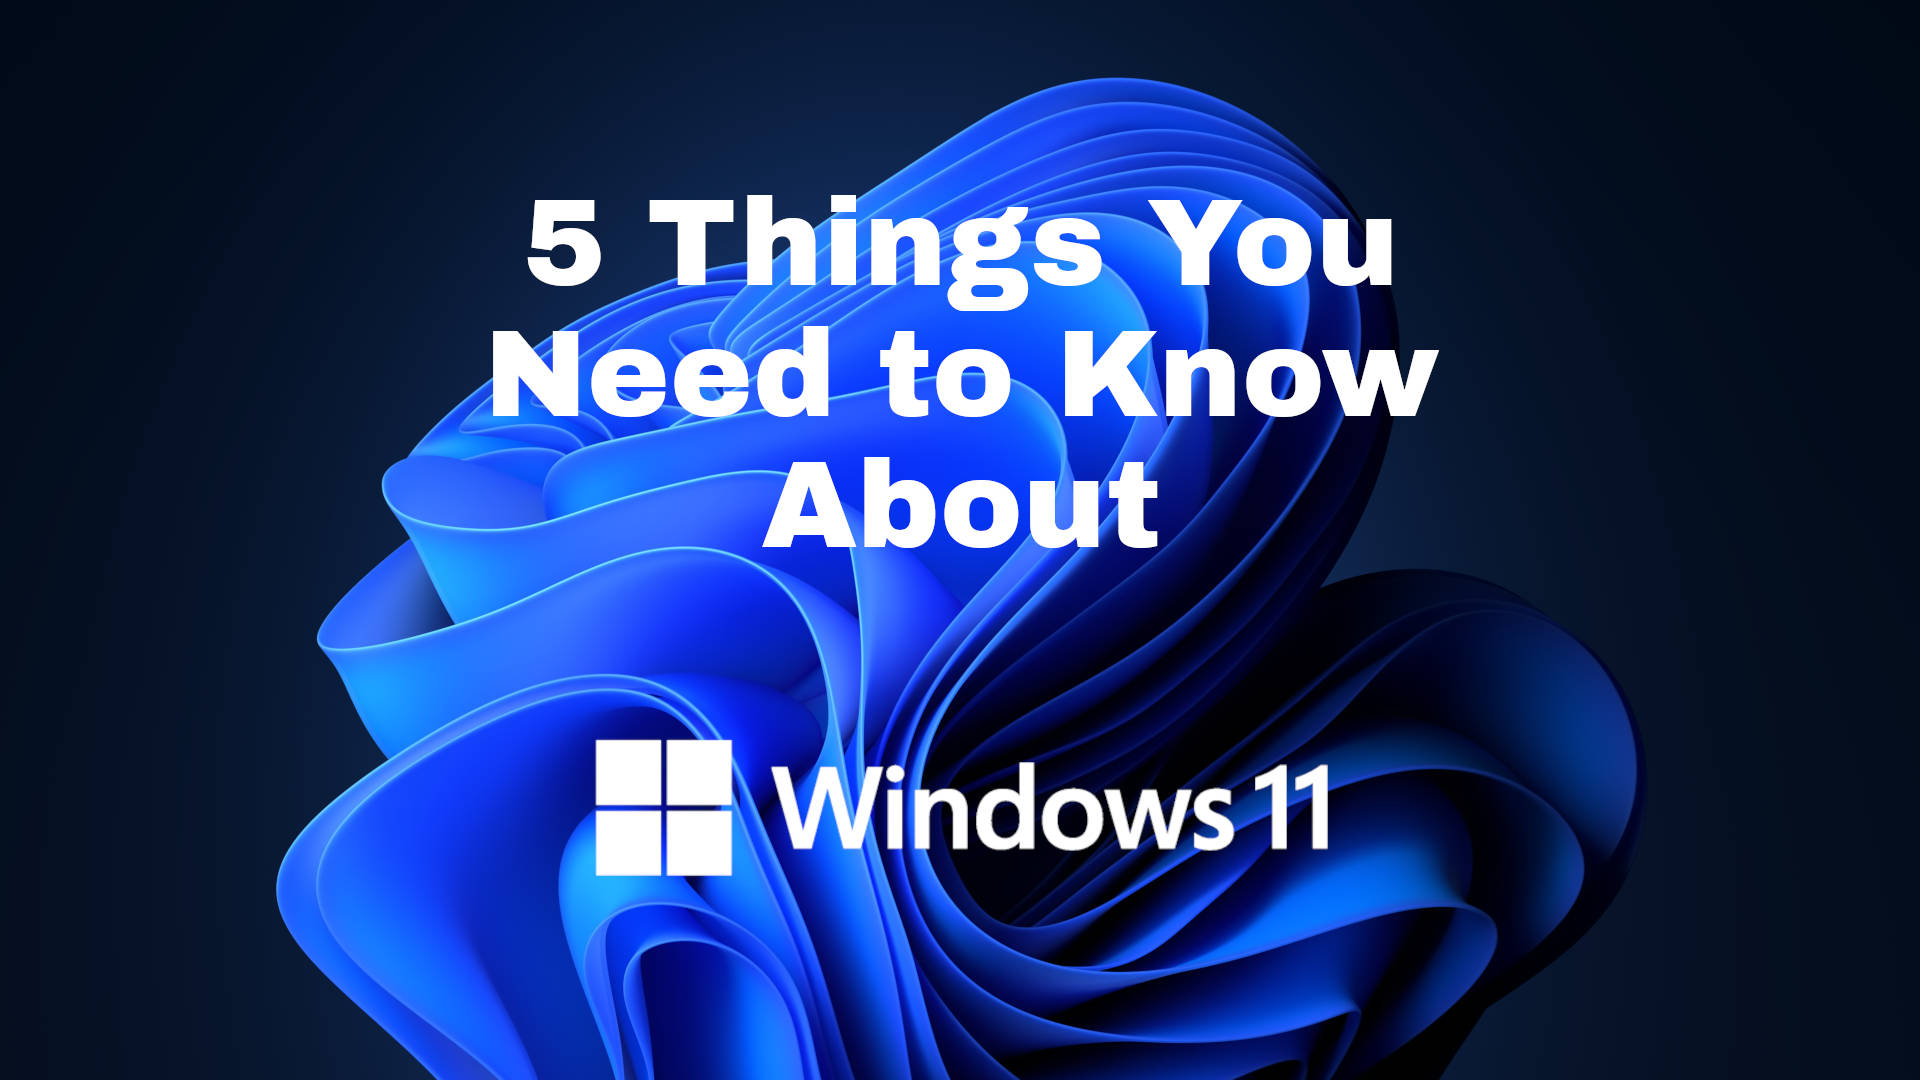 Image of Windows 11 Screensaver with the text '5 Things you need to know about' and the Windows 11 logo.